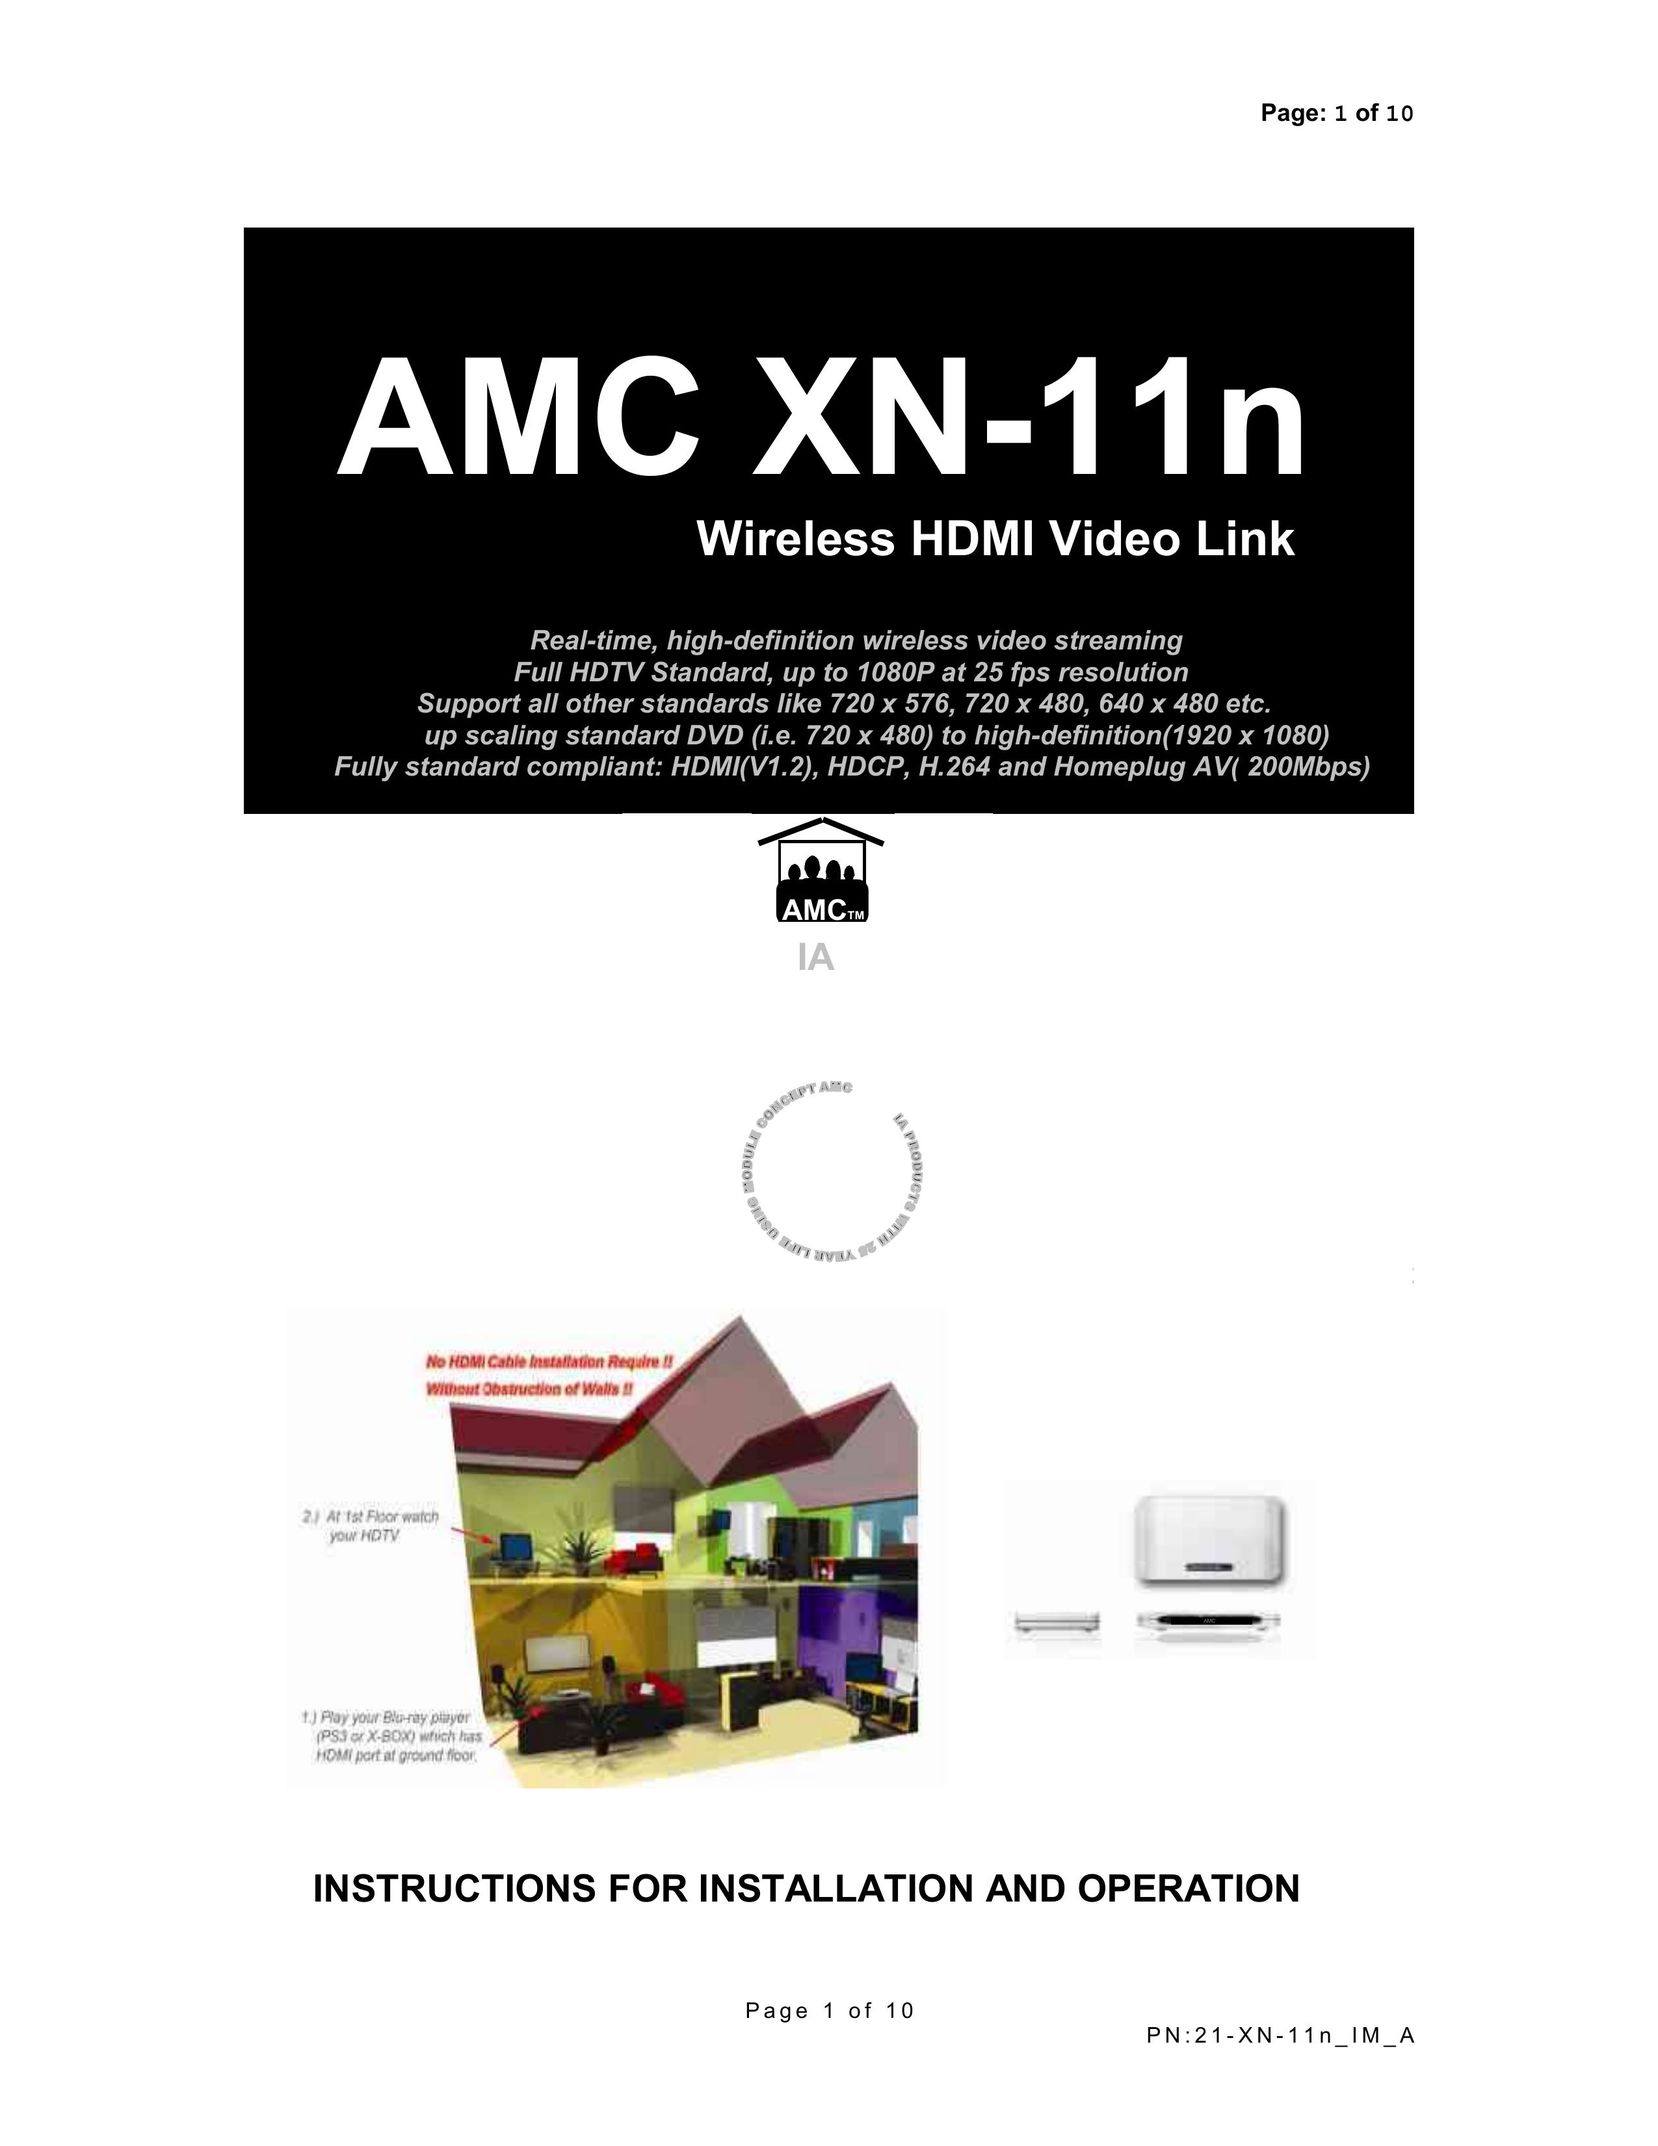 AMC XN-11n Home Theater System User Manual